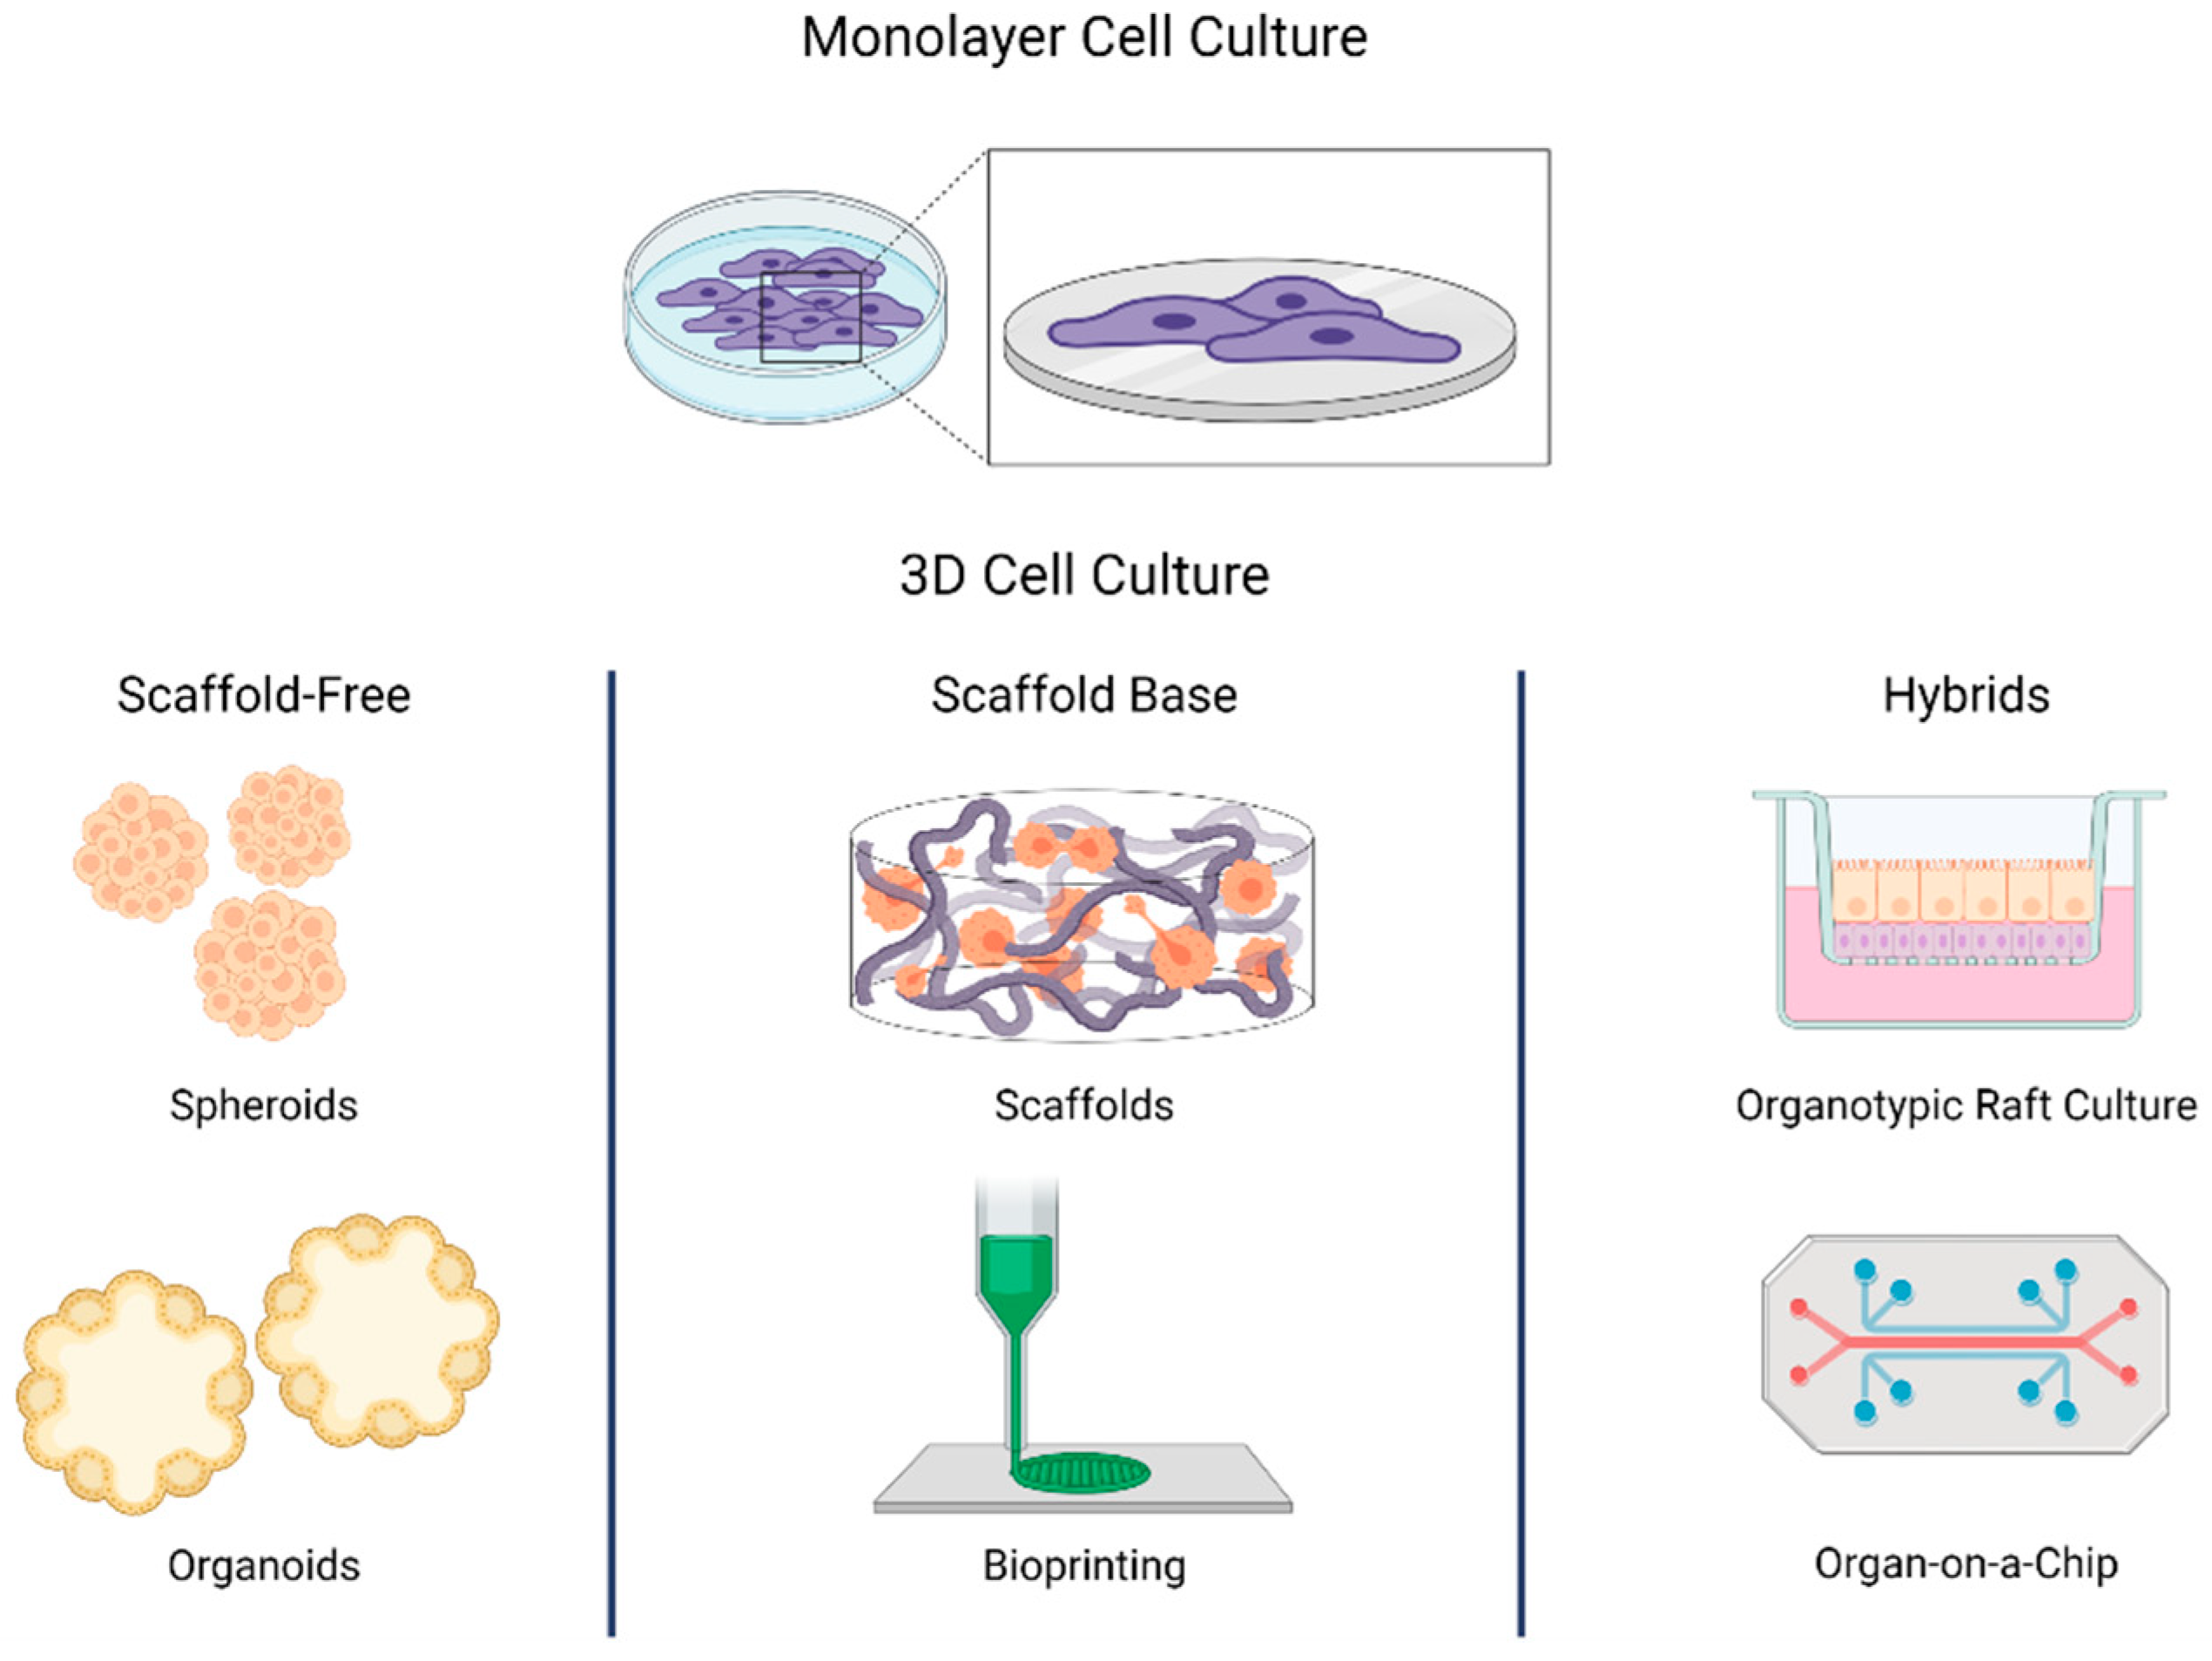 Biomedicines | Free Full-Text | 3D Cell Culture Models in COVID-19 Times: A  Review of 3D Technologies to Understand and Accelerate Therapeutic Drug  Discovery